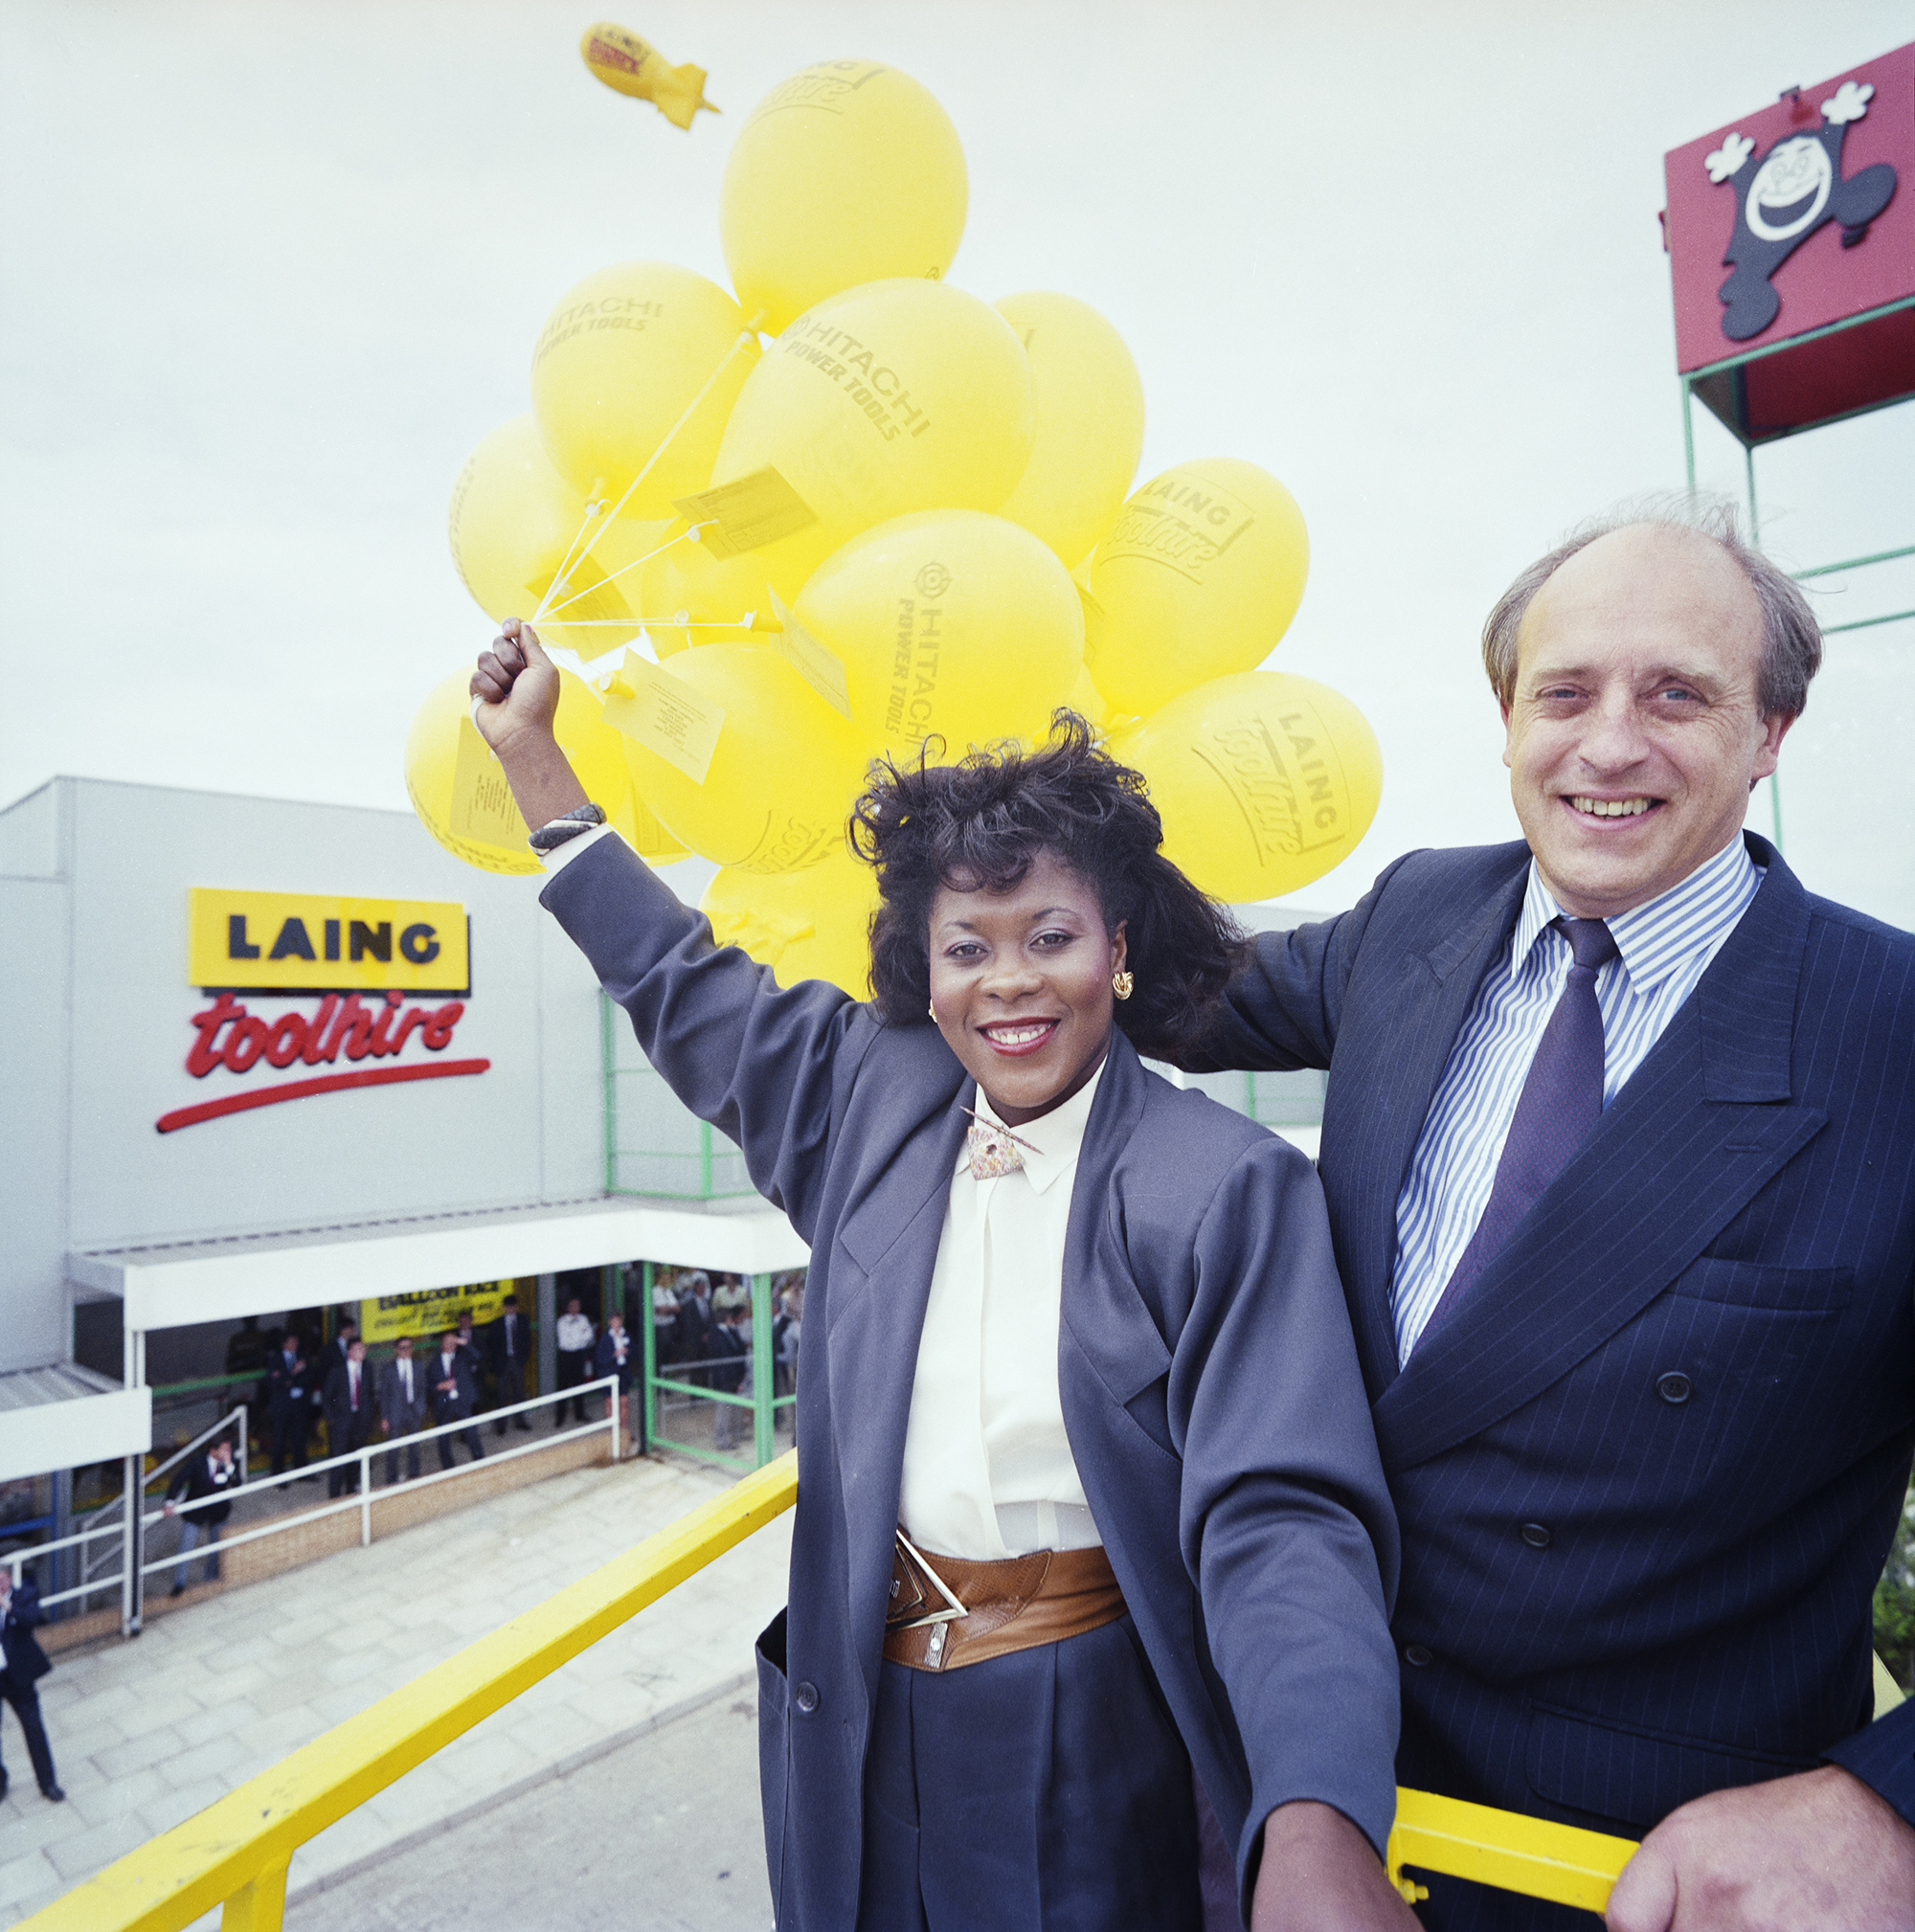 A man and woman pose for a picture. The man is on the right and wears a blue business suit. The woman on the left wears a grey suit and holds yellow balloons. In the background, there is a grey building with the title ‘Laing Toolhire’ on it.